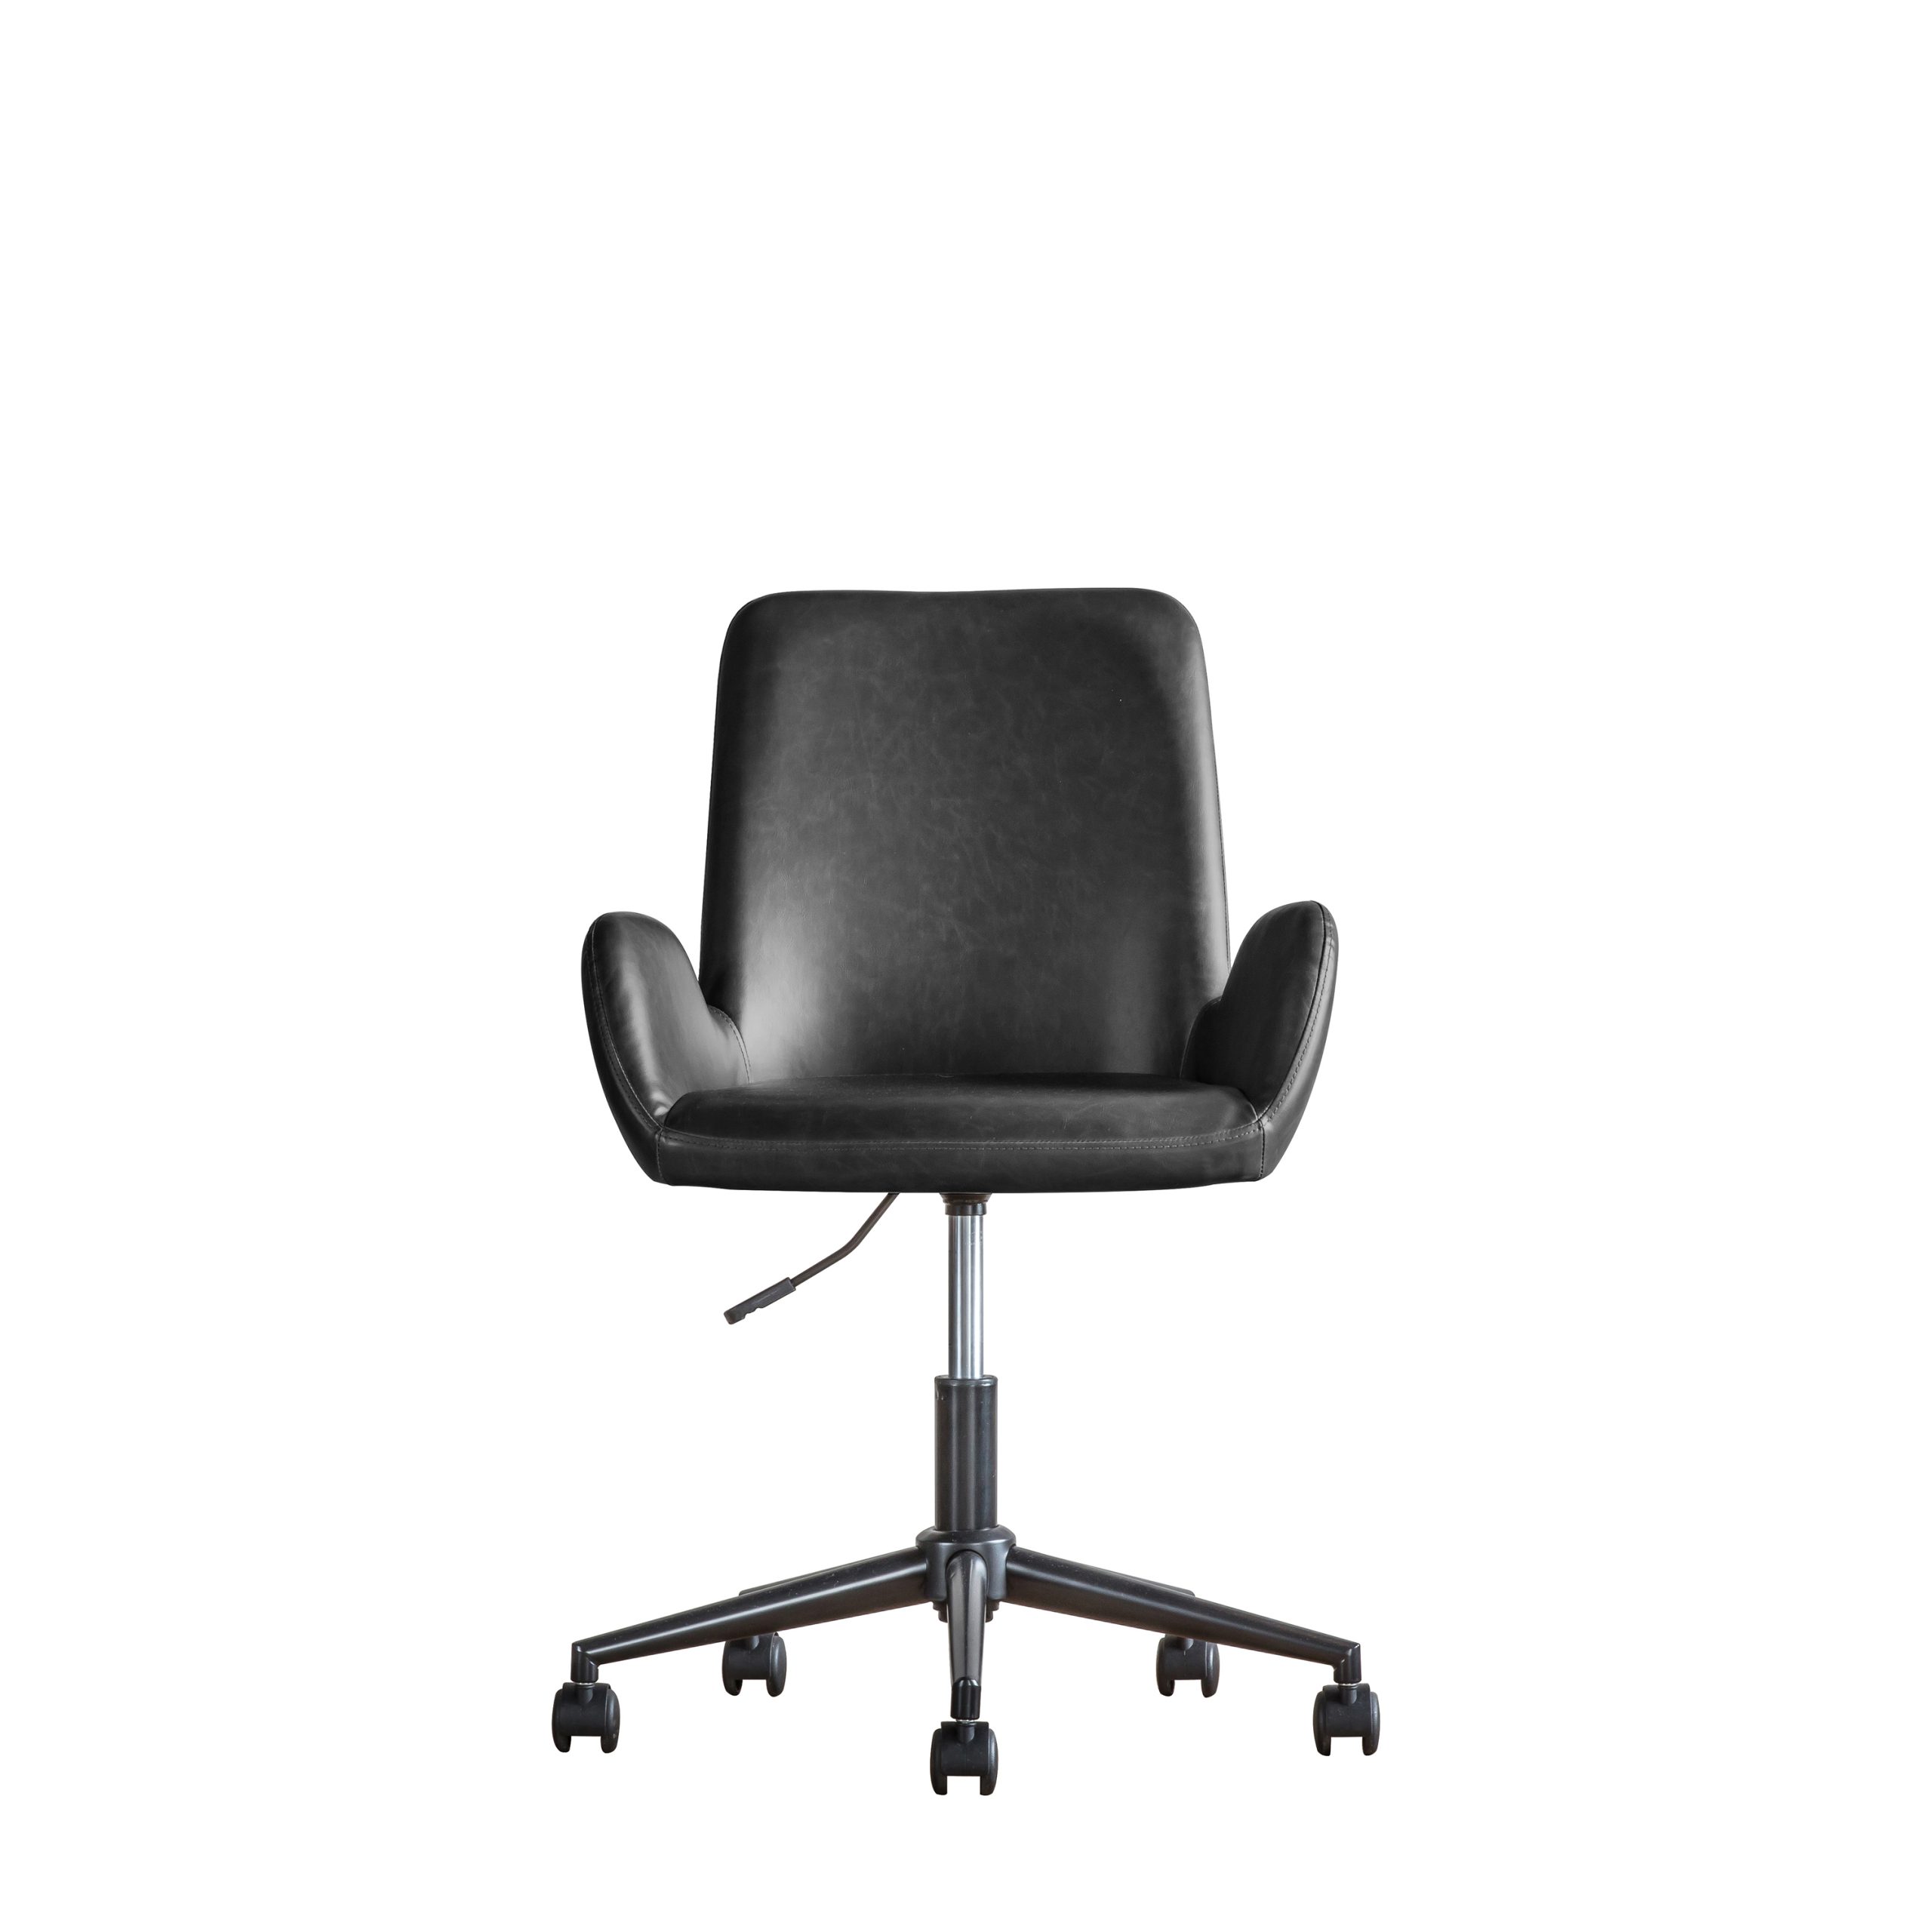 Gallery Direct Faraday Swivel Chair Charcoal